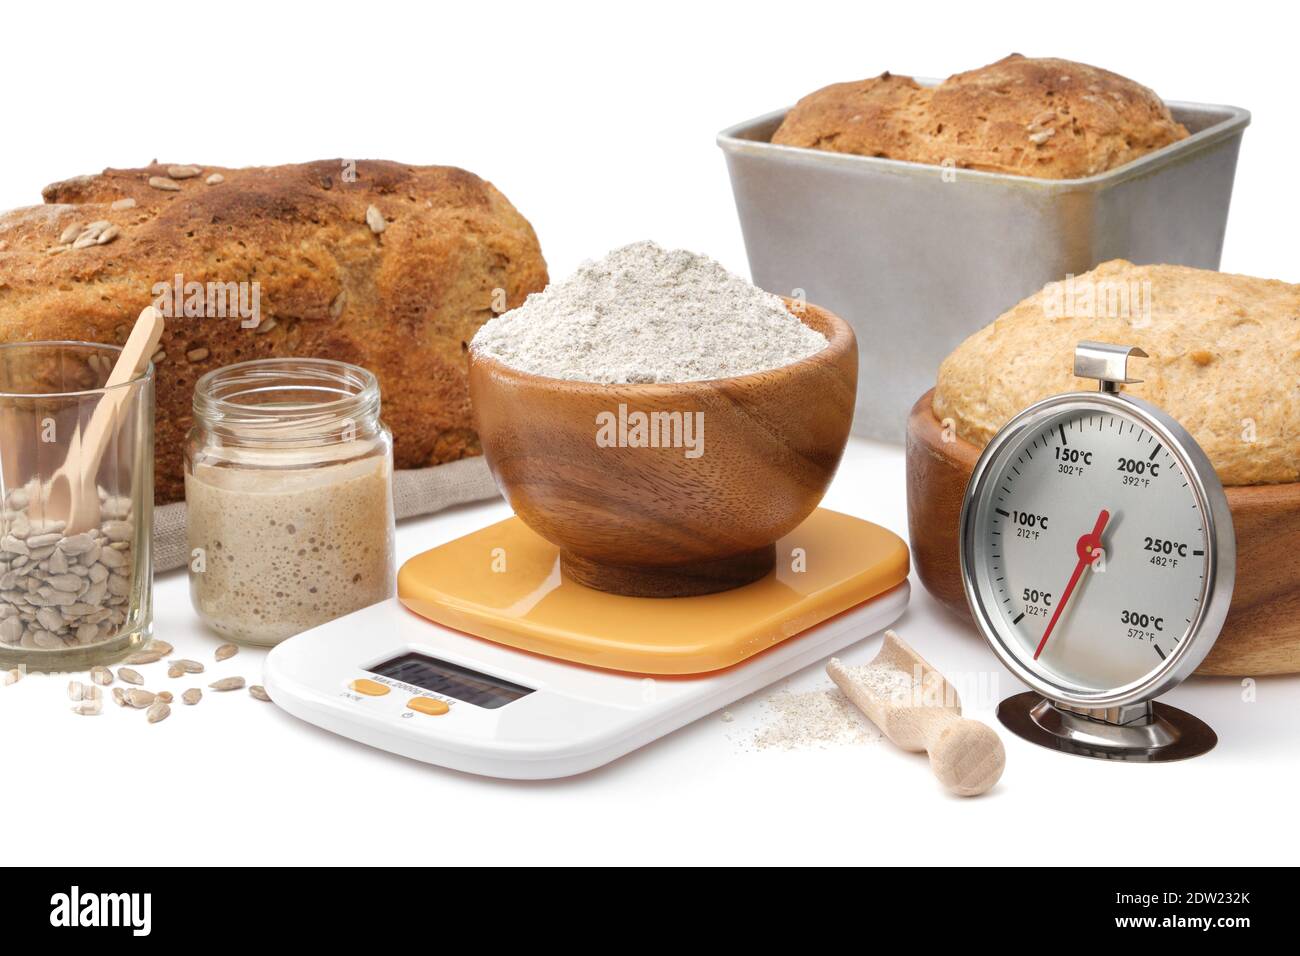 https://c8.alamy.com/comp/2DW232K/homemade-sourdough-bread-natural-leaven-for-bread-in-a-glass-jar-wooden-bowl-of-dough-kitchen-scale-a-bowl-of-flour-and-oven-thermometer-on-white-2DW232K.jpg